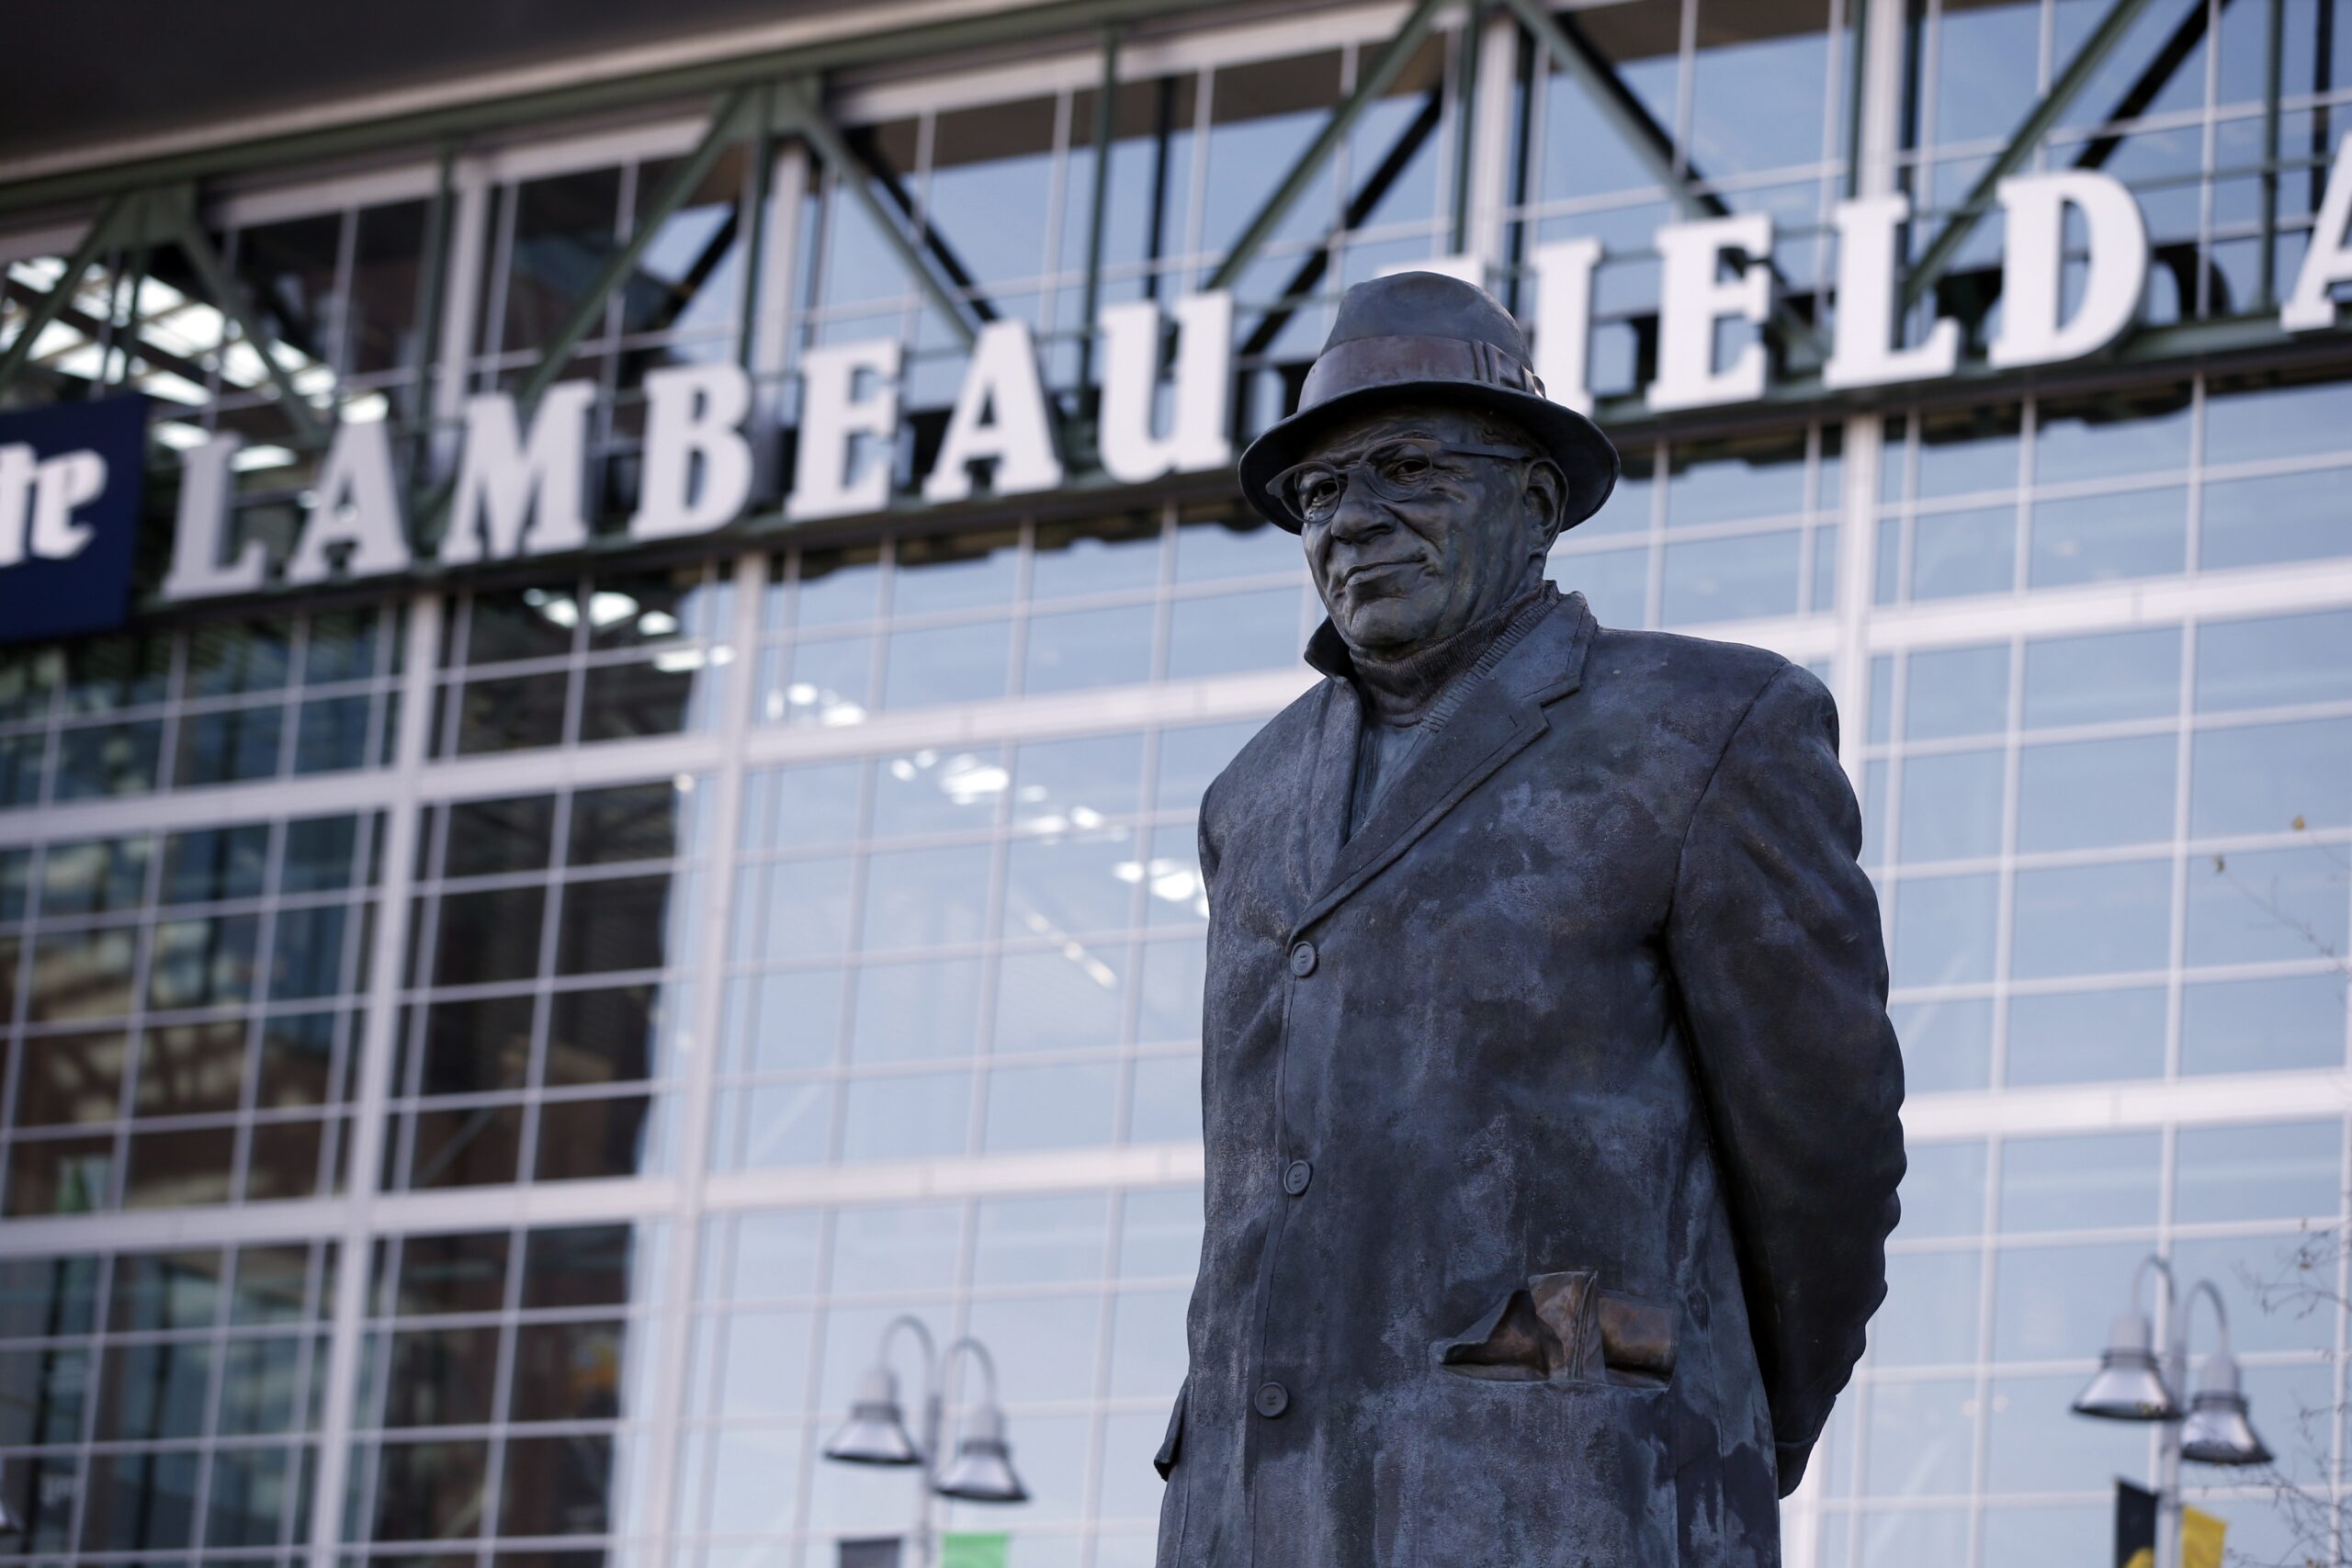 Vince Lombardi To Play Special Role At Super Bowl Thanks To CGI, AI